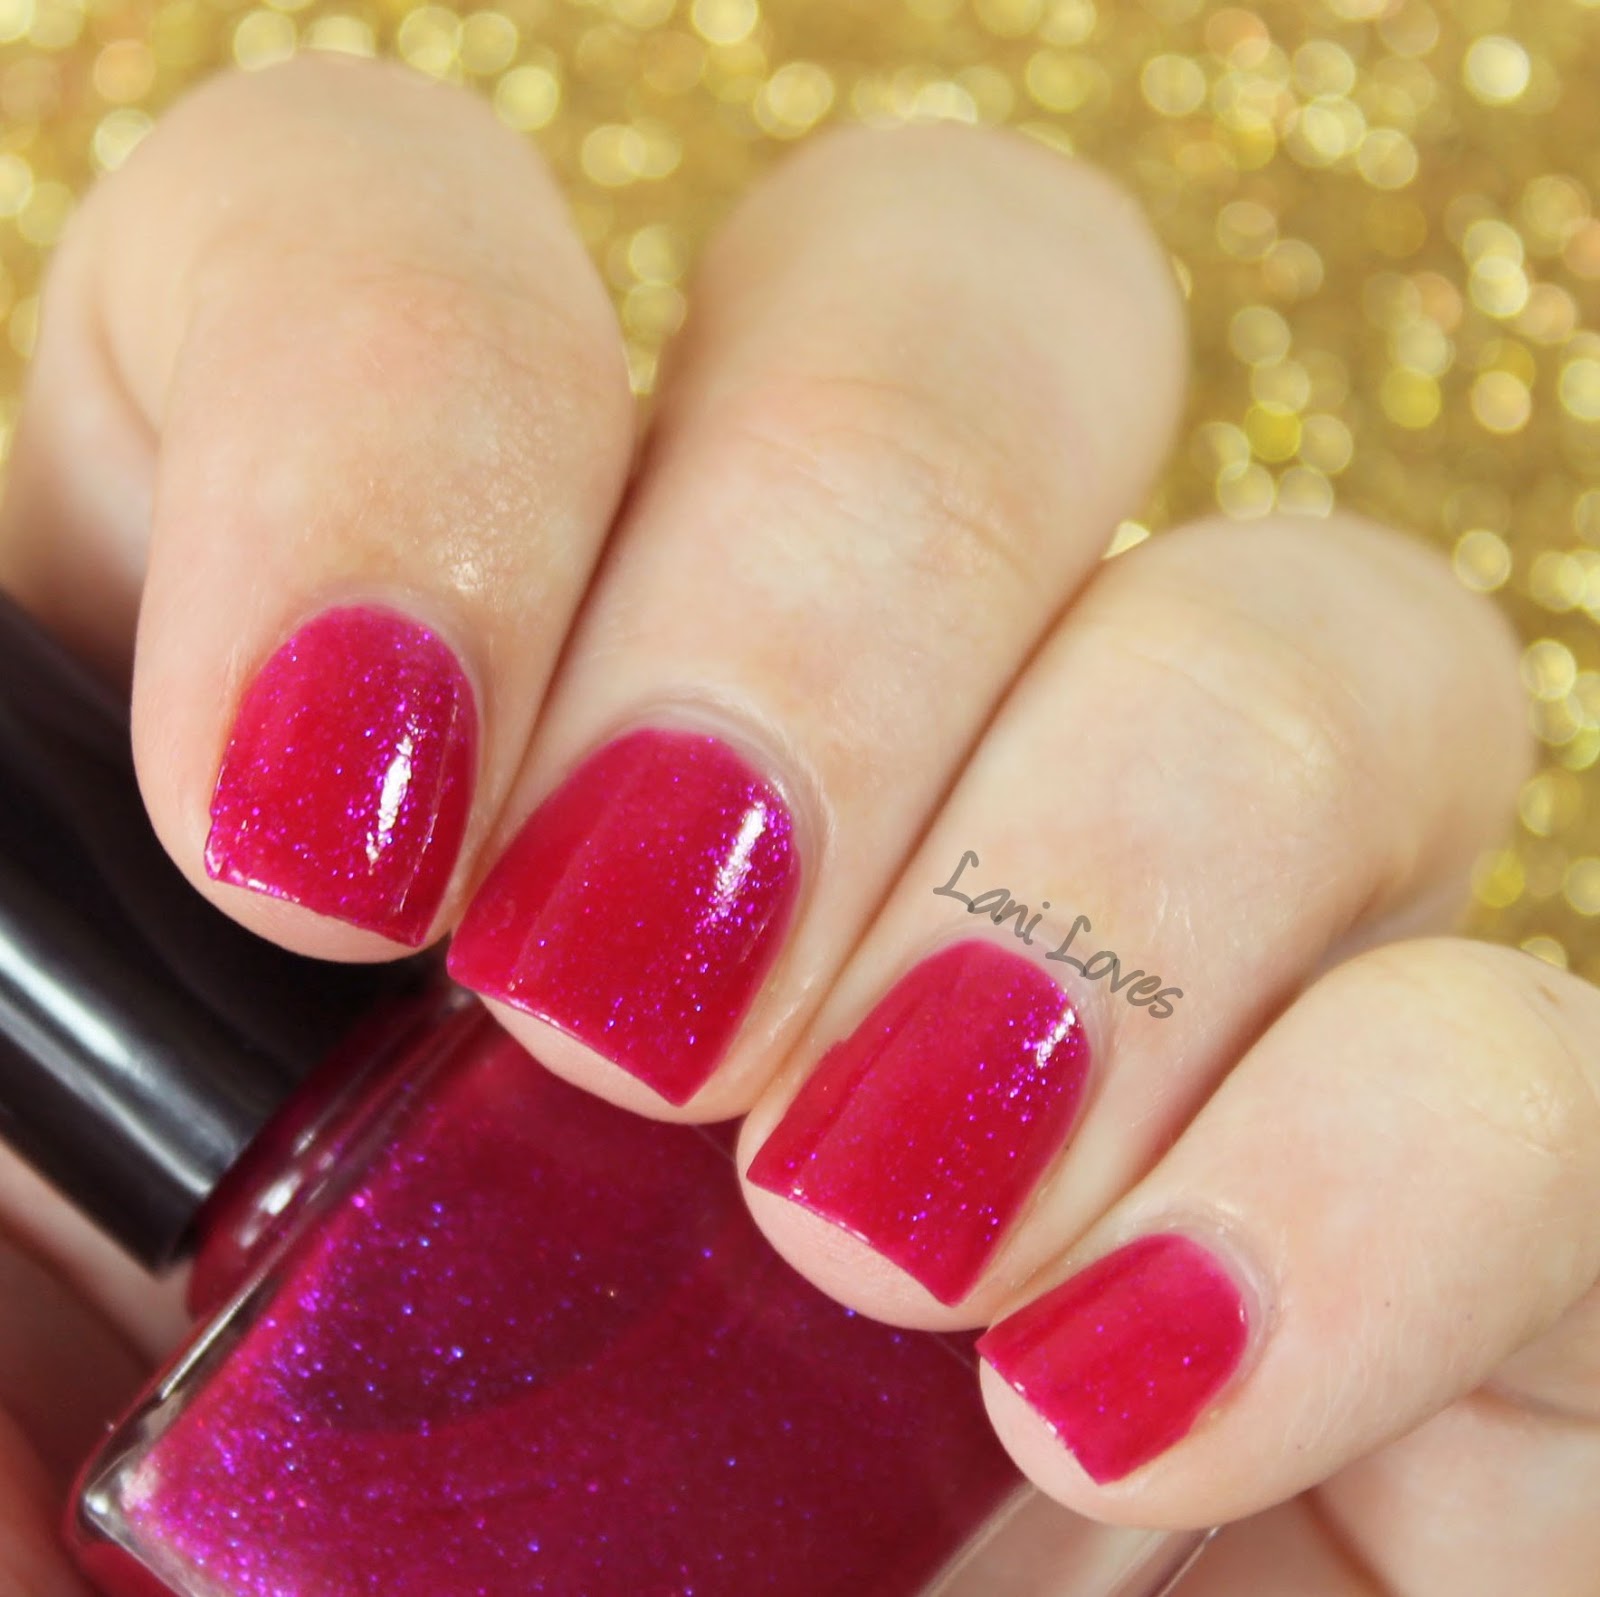 Femme Fatale Cosmetics Brain Link nail polish swatches & review